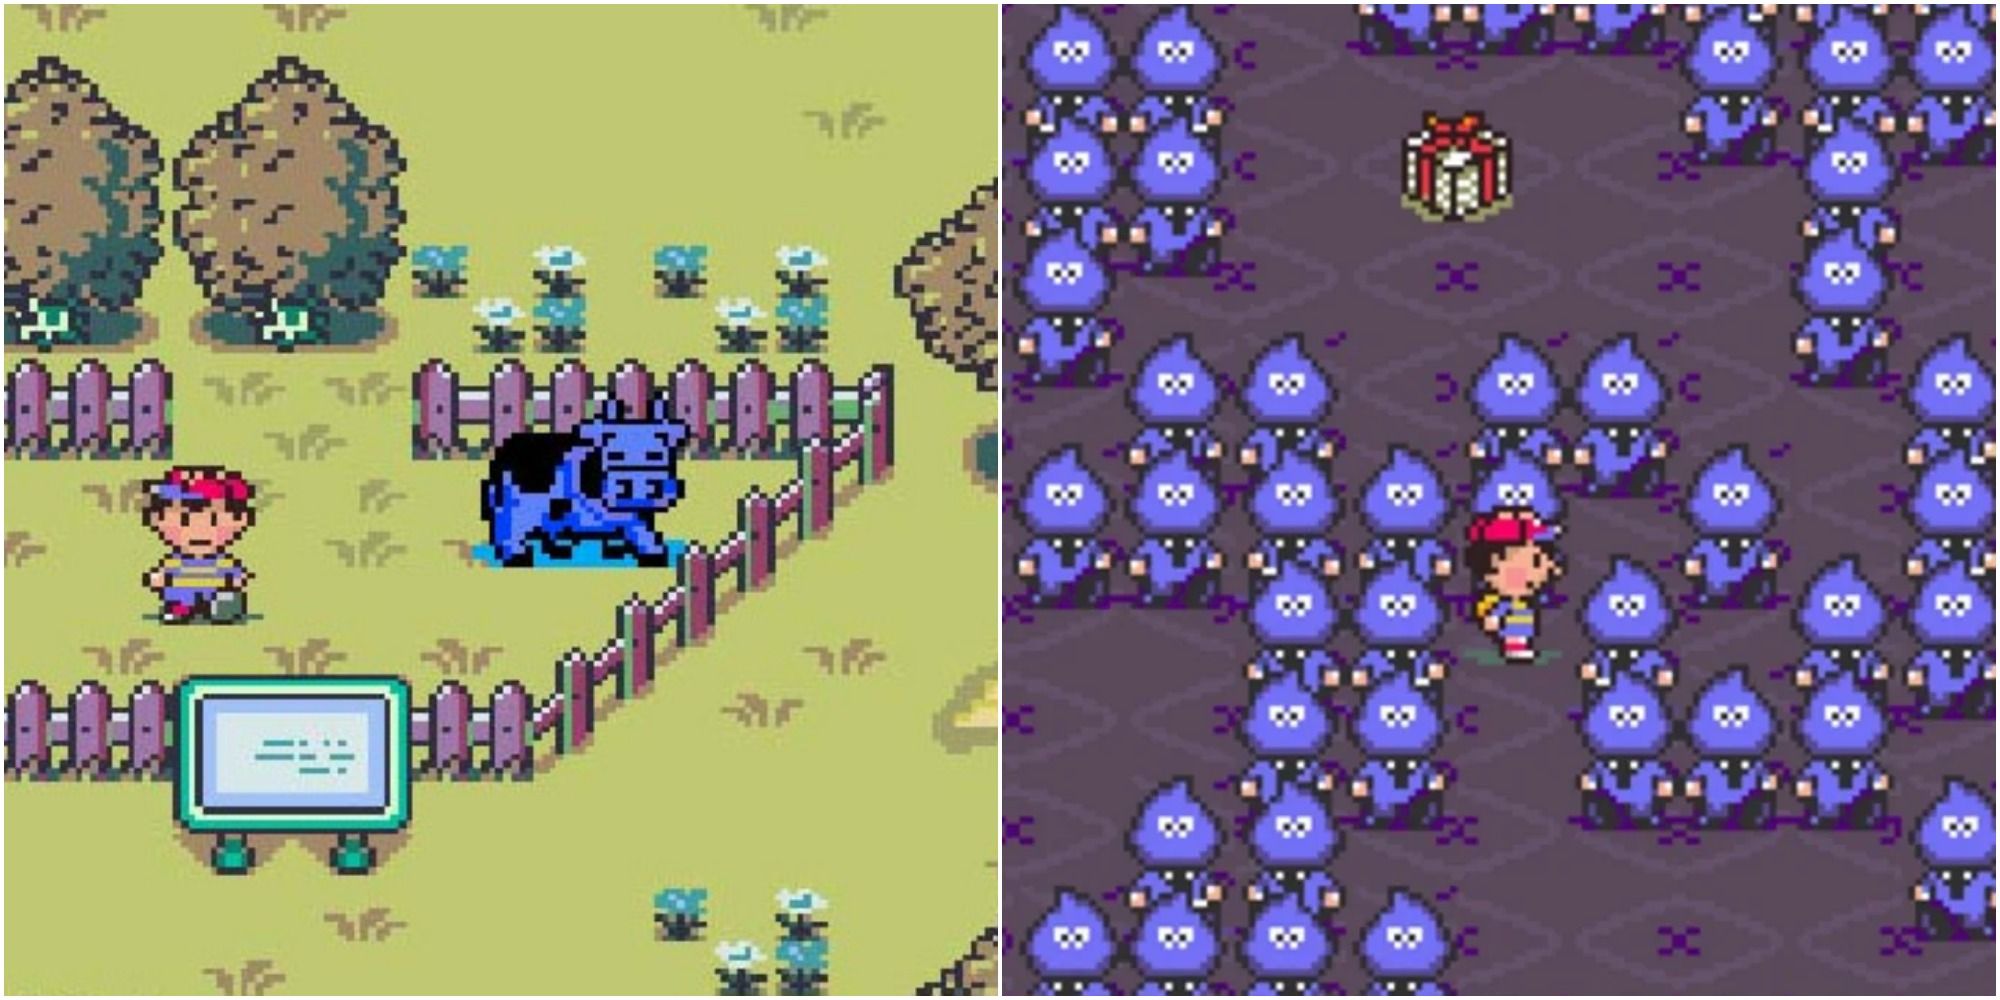 Split image screenshots of the Blue Cow and Happy Happyism cult members in EarthBound.